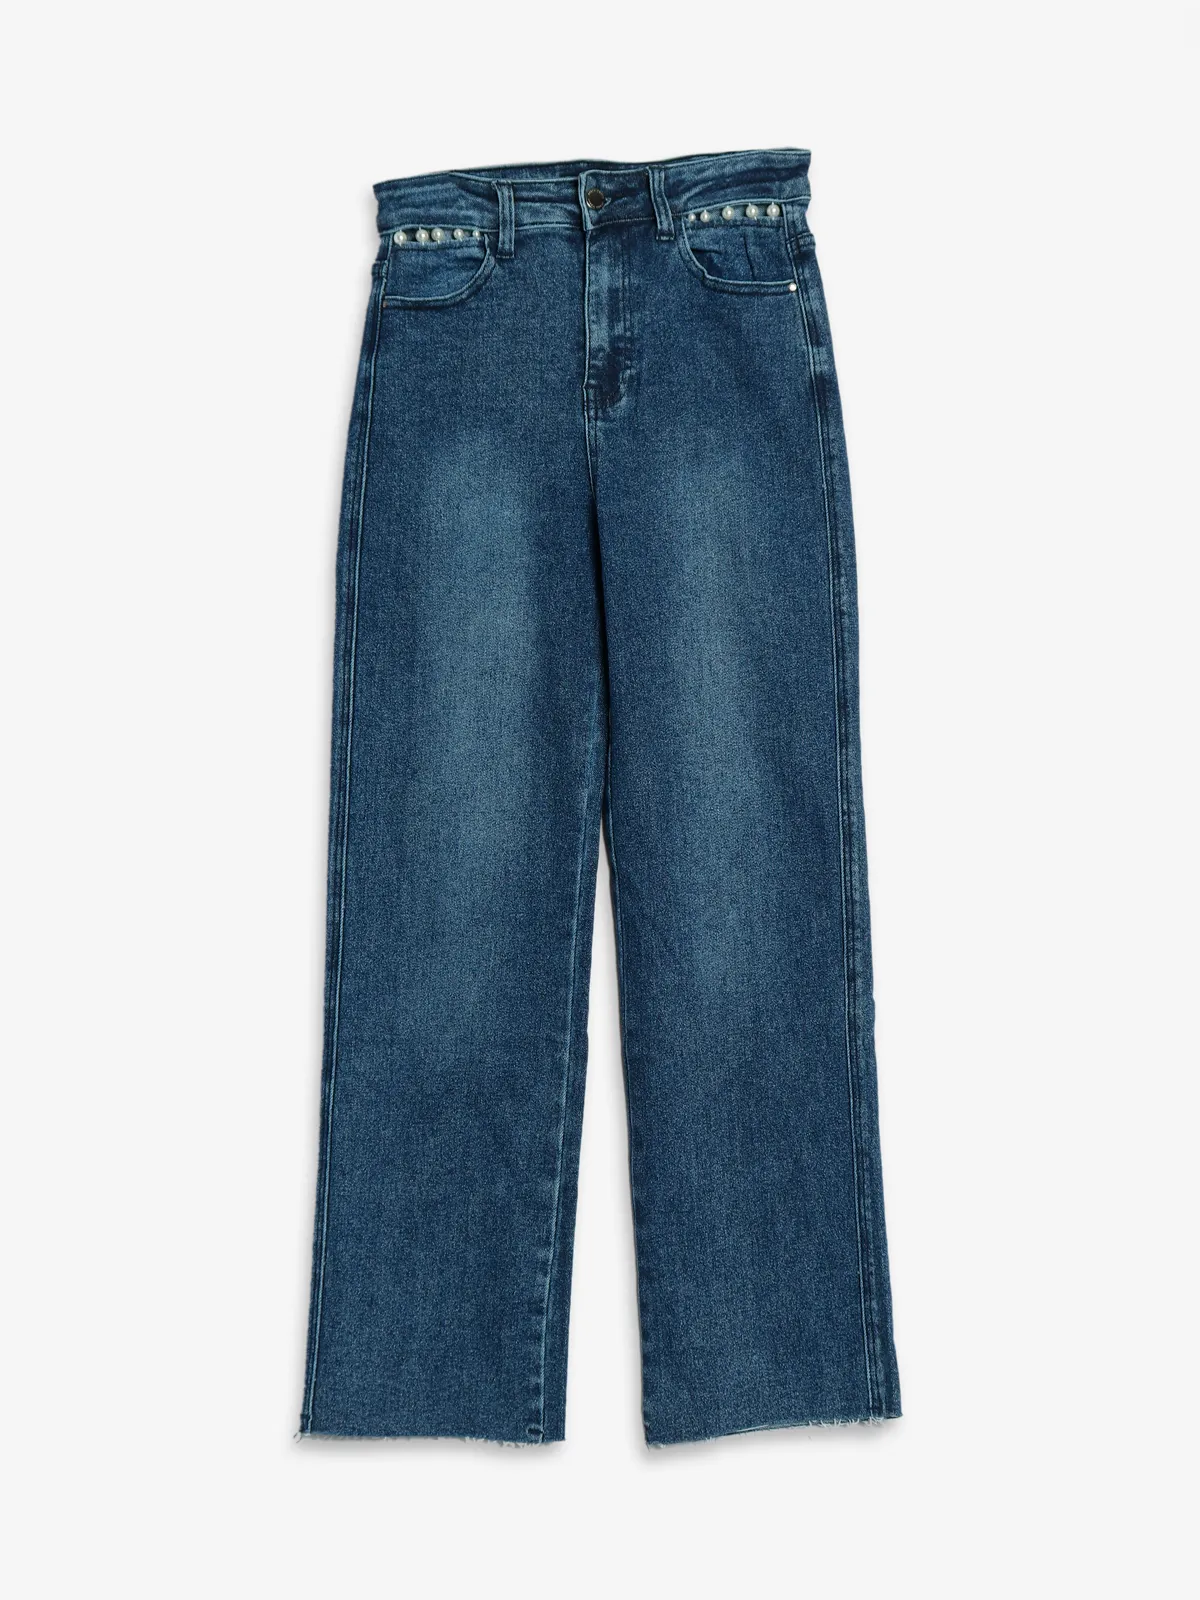 Deal dark blue washed straight jeans